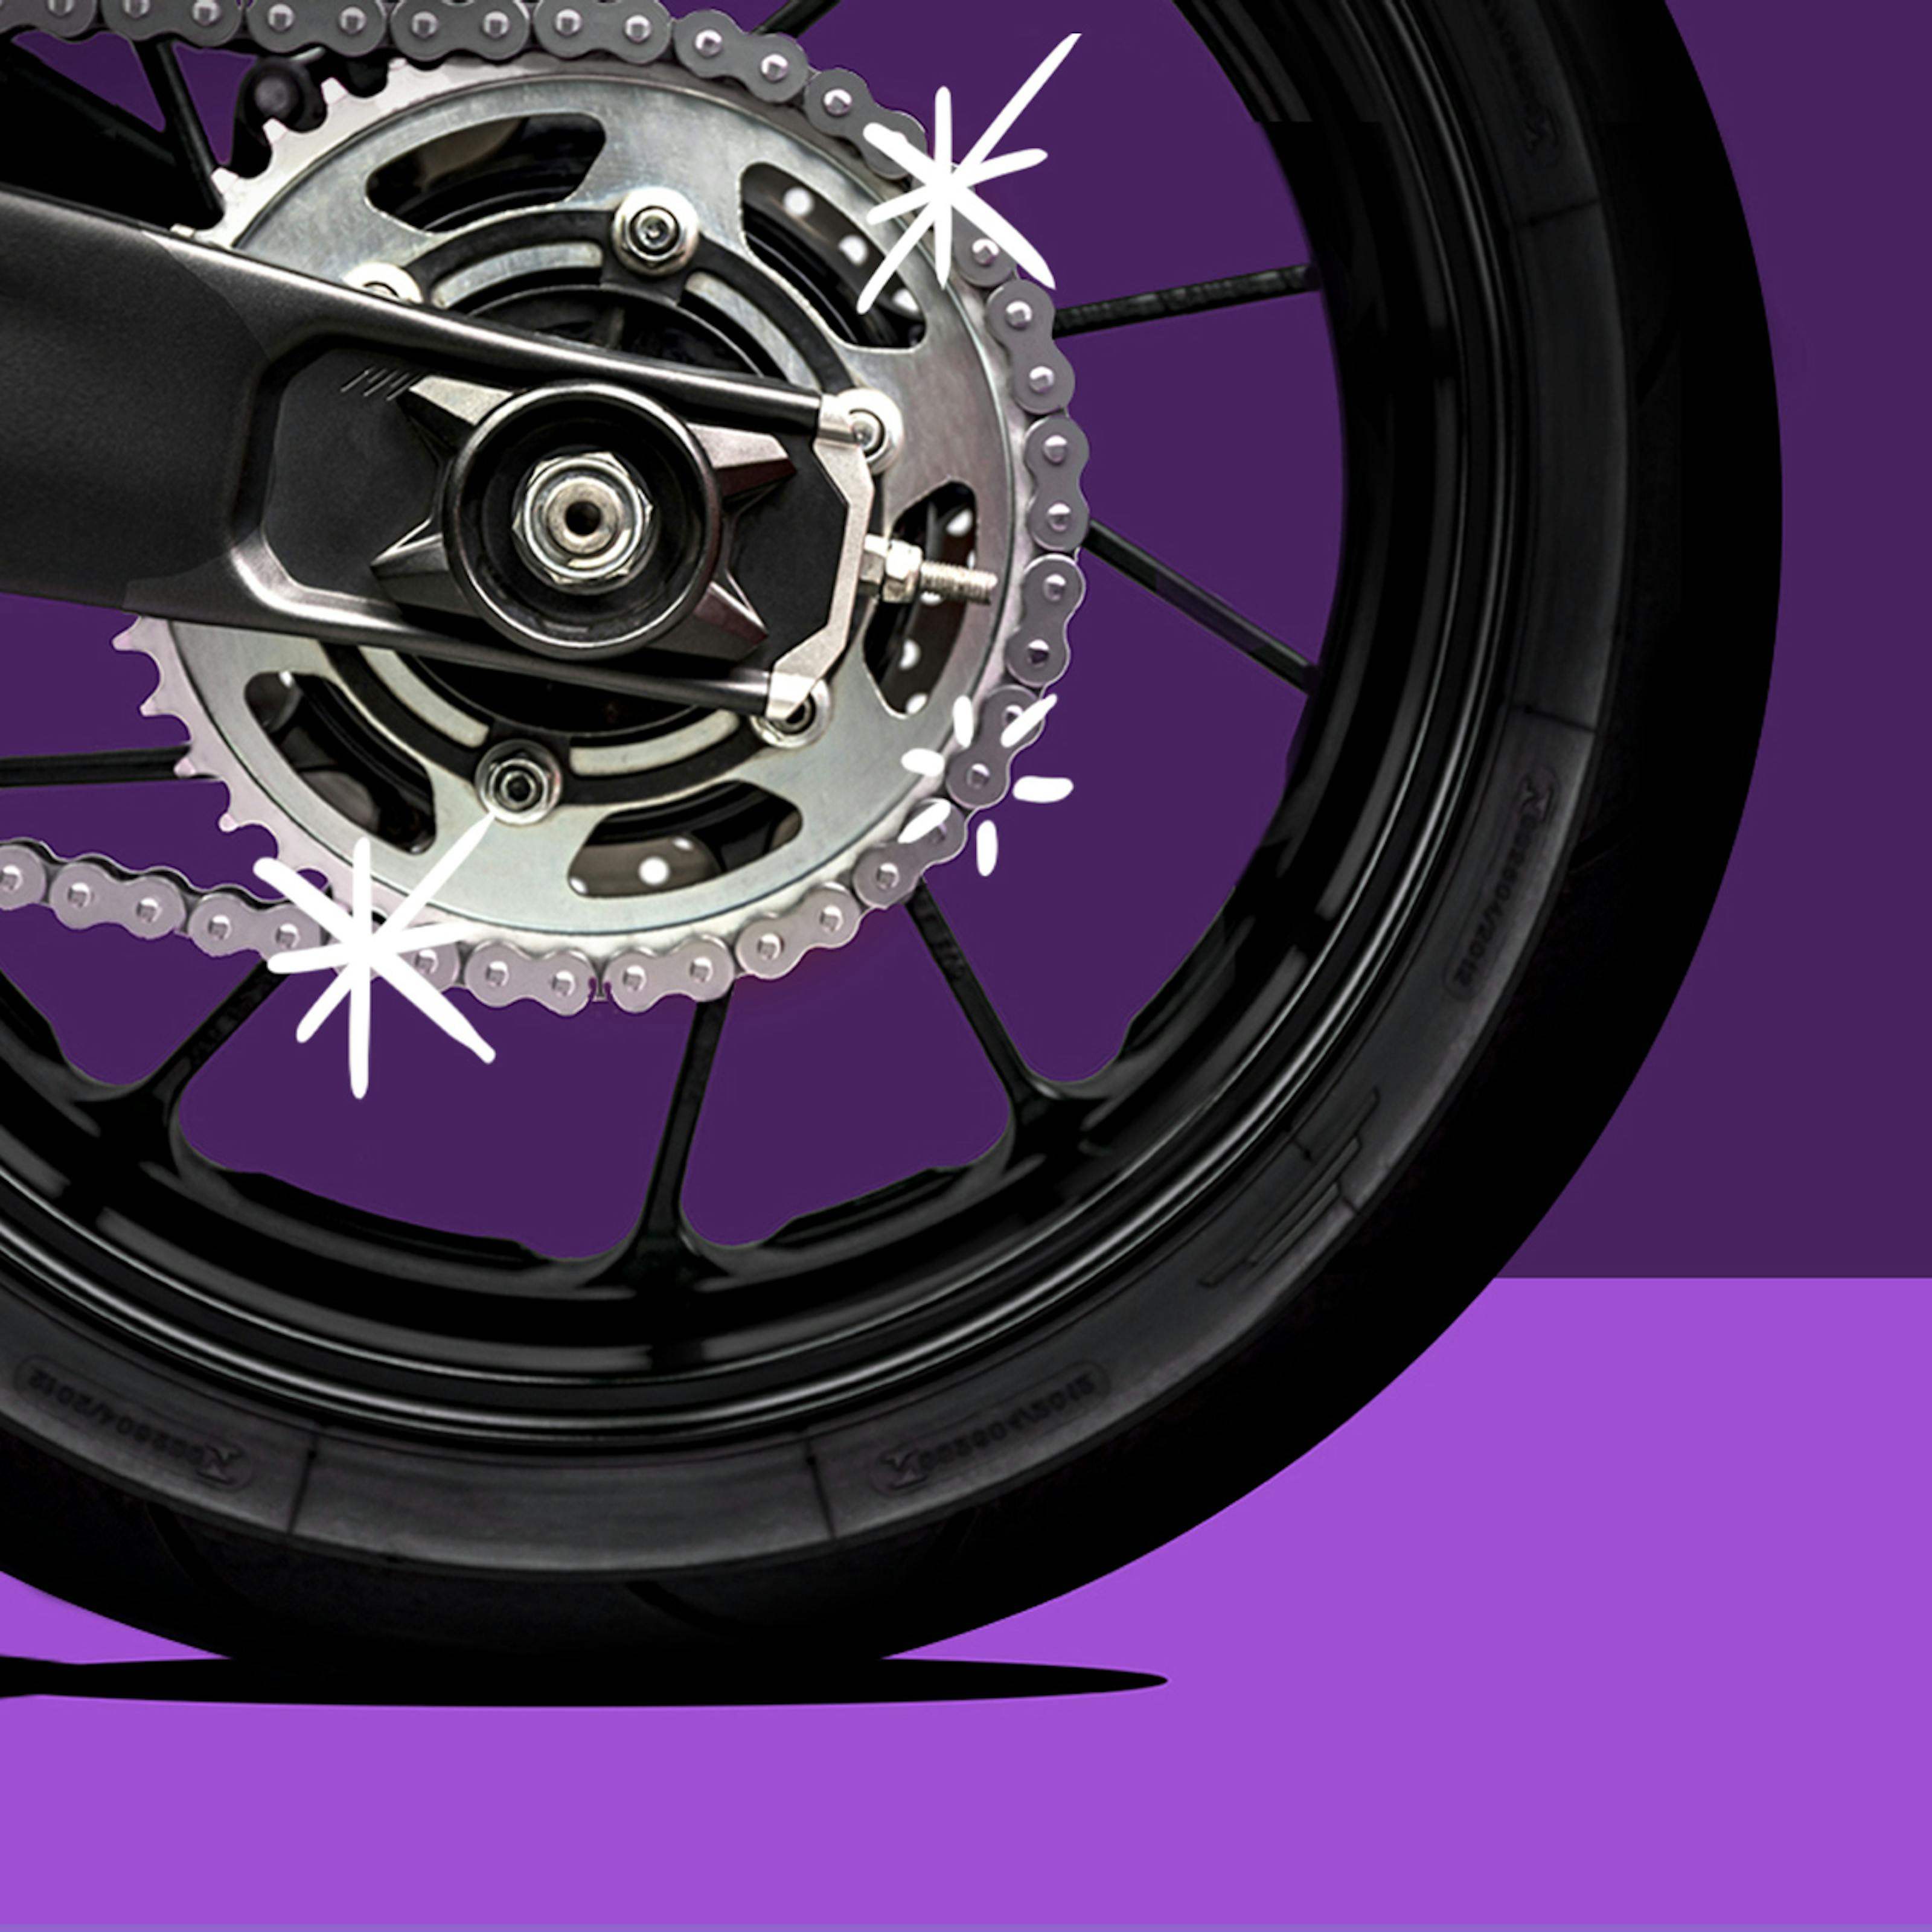 LEARN HOW TO CLEAN YOUR MOTORCYCLE CHAIN